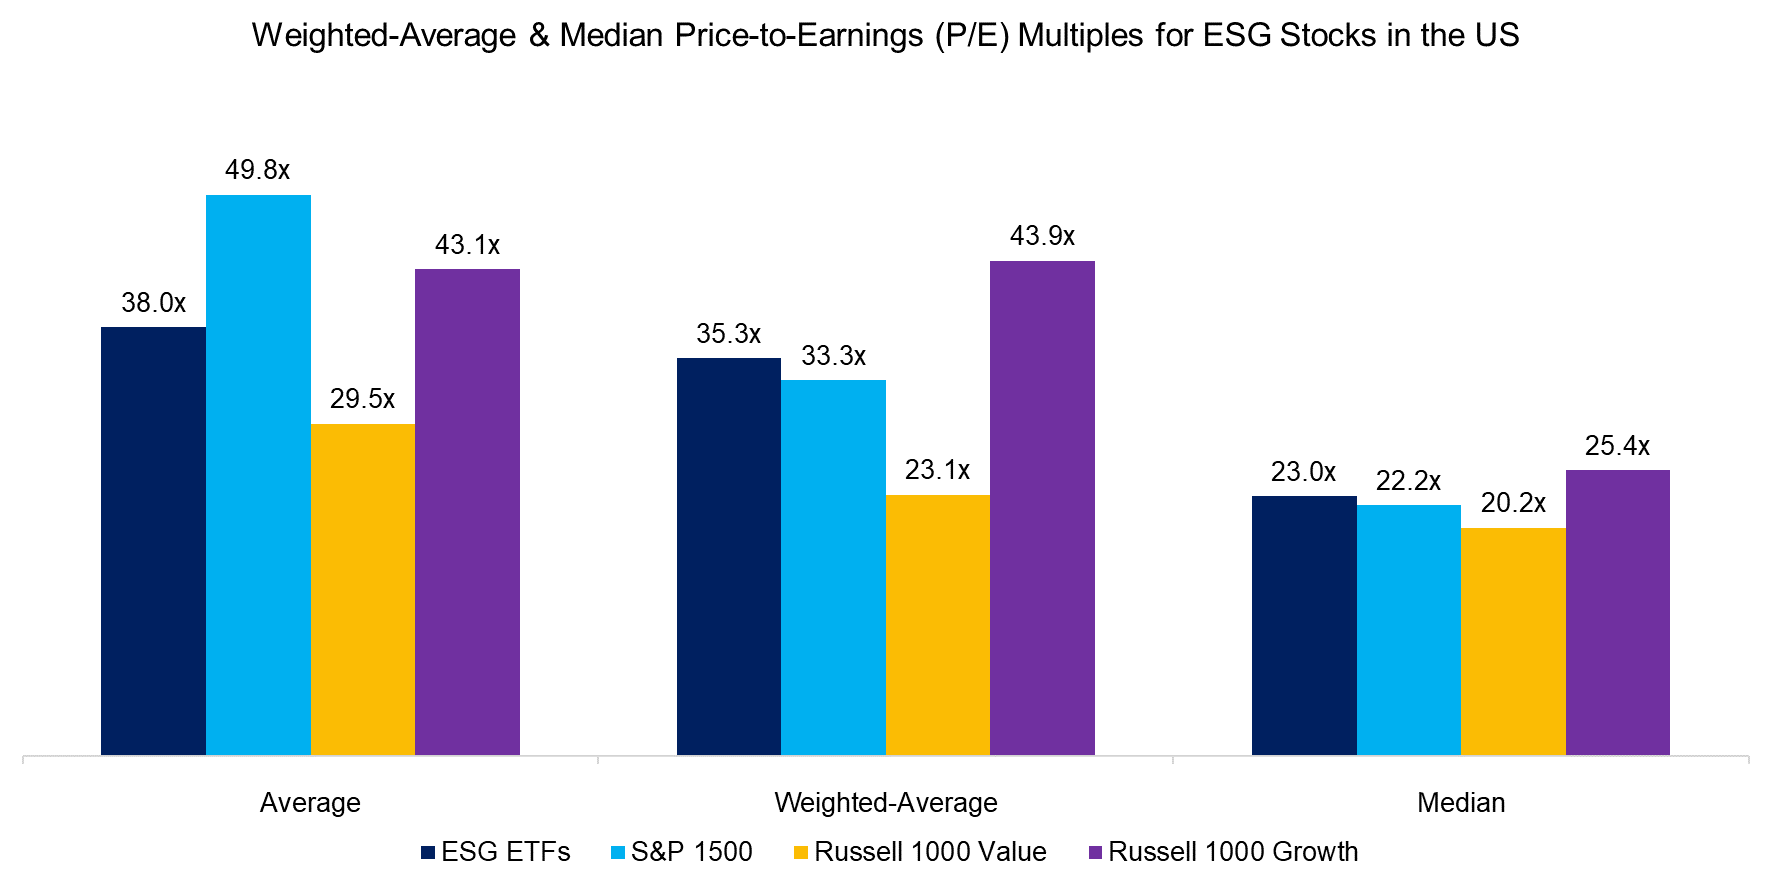 Weighted-Average & Median Price-to-Earnings (PE) Multiples for ESG Stocks in the US